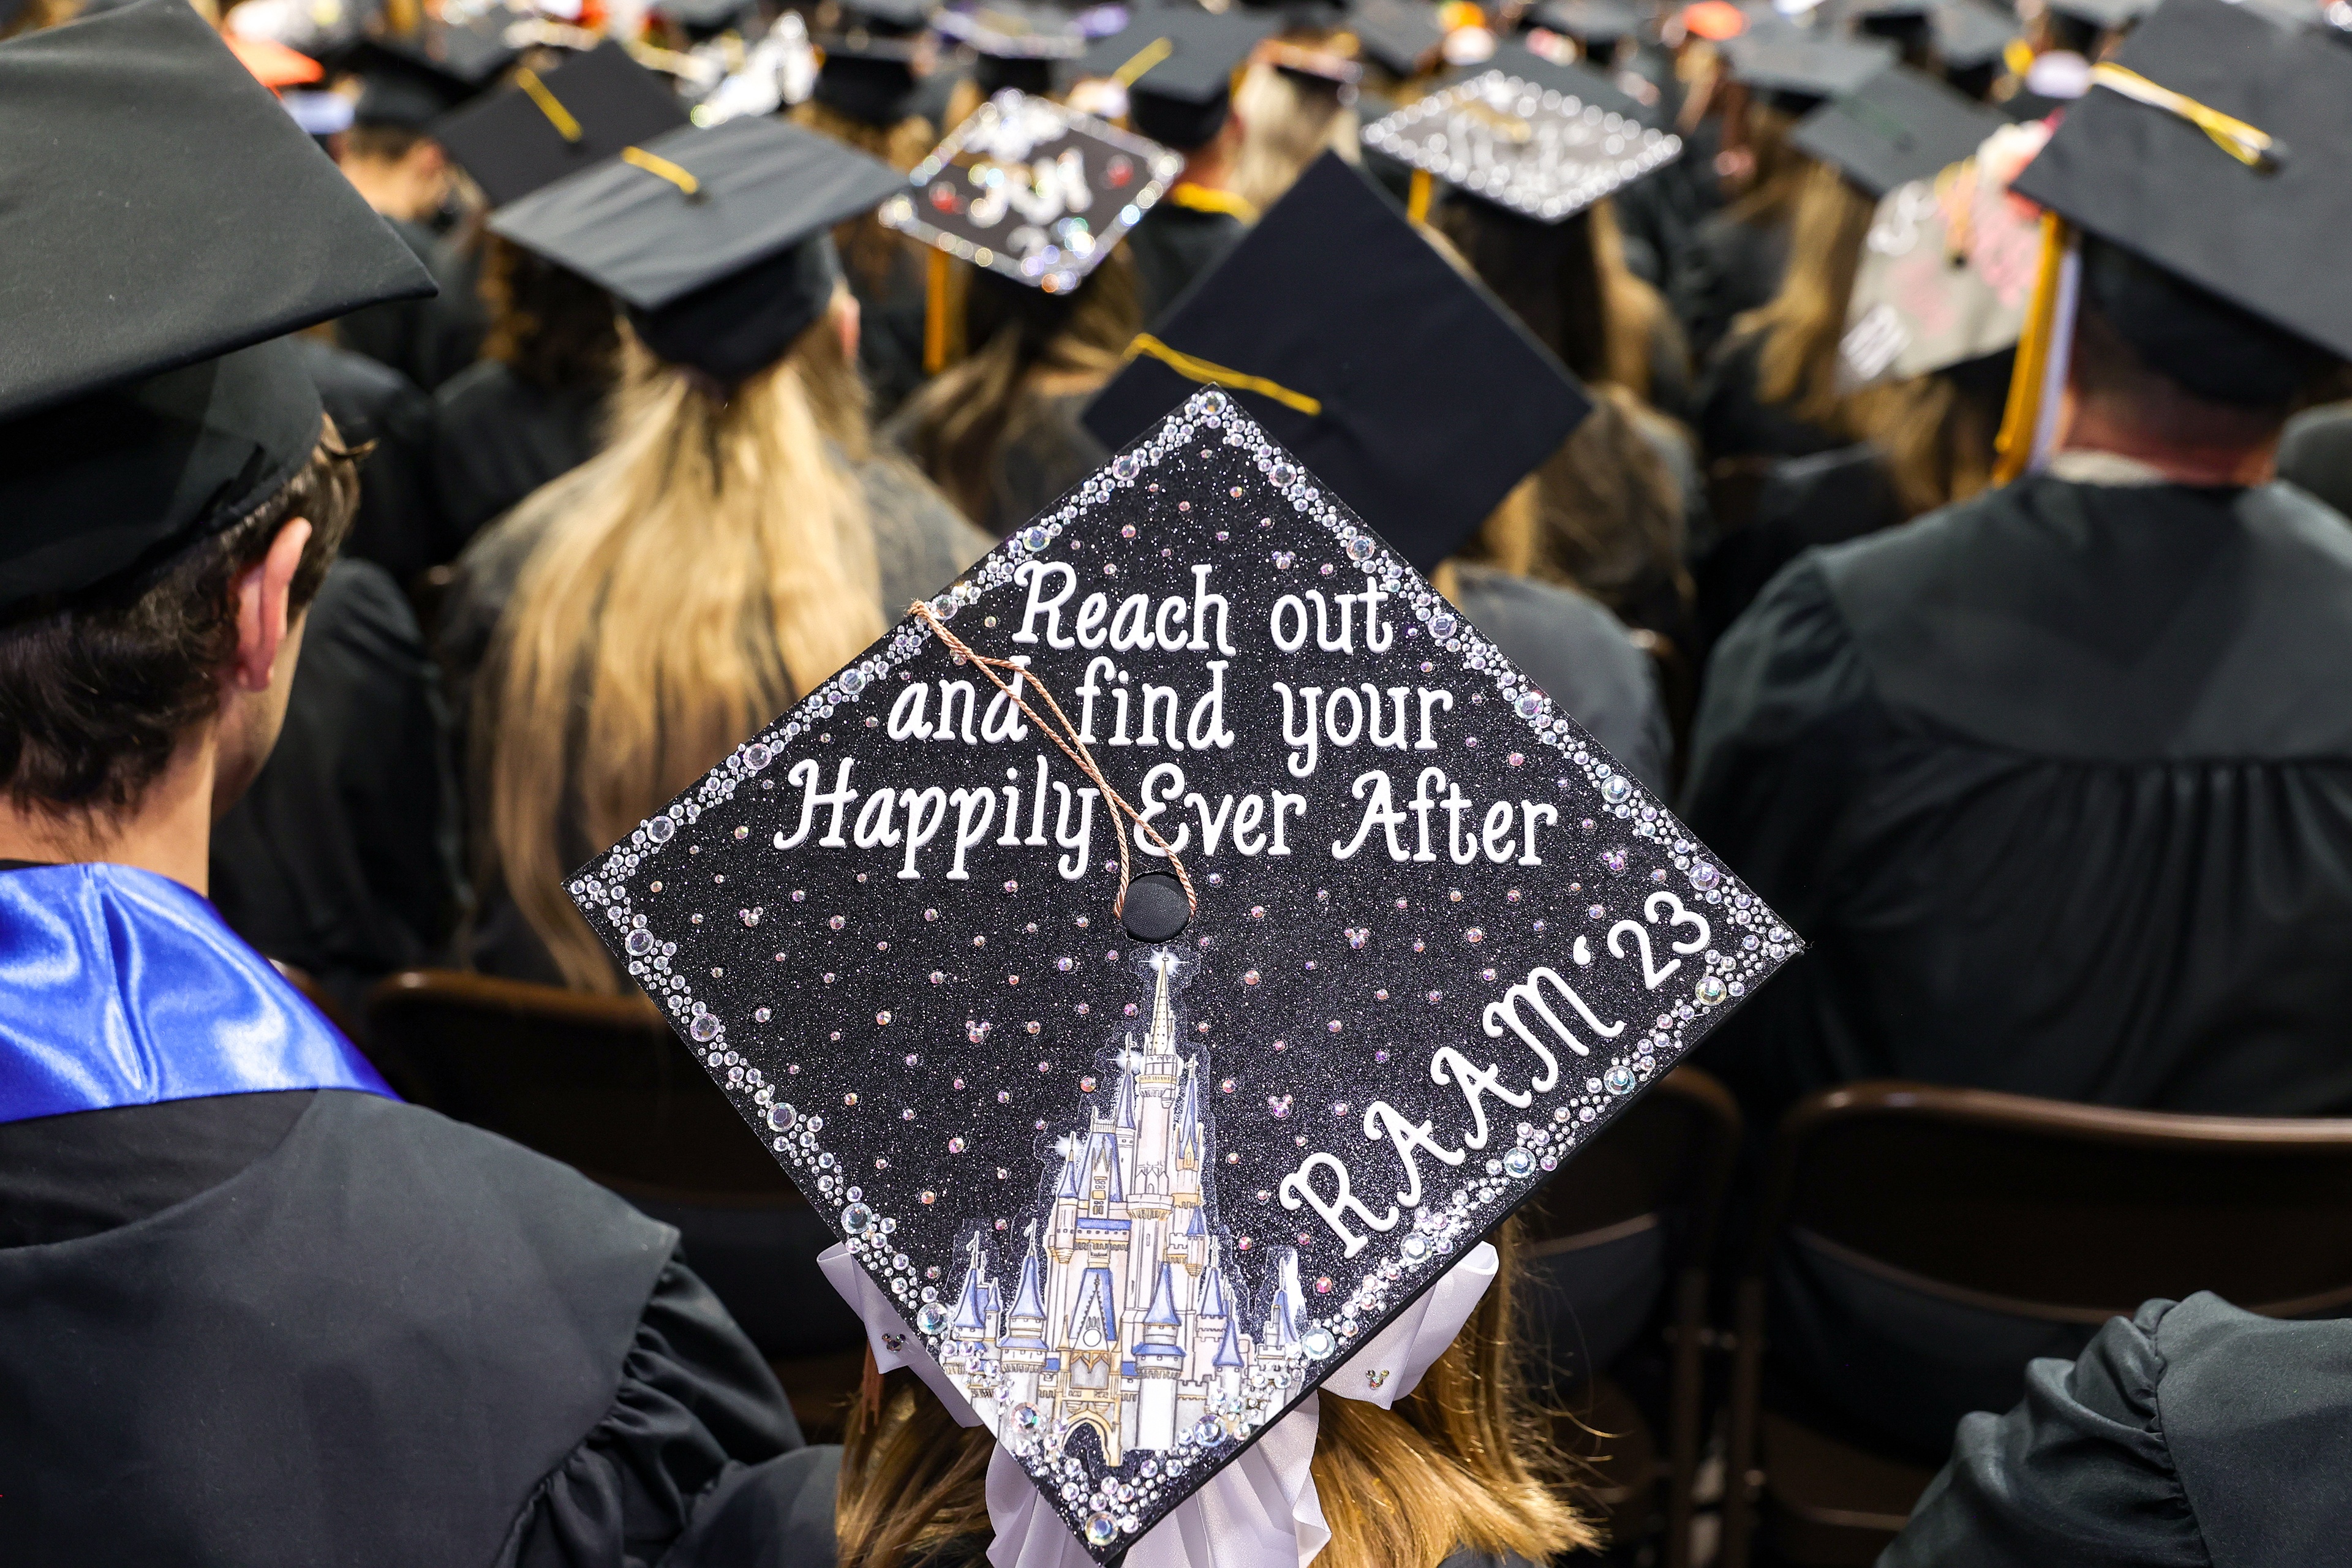 Graduation cap says, “Reach out and find your Happily Ever After / RAAM ’23”